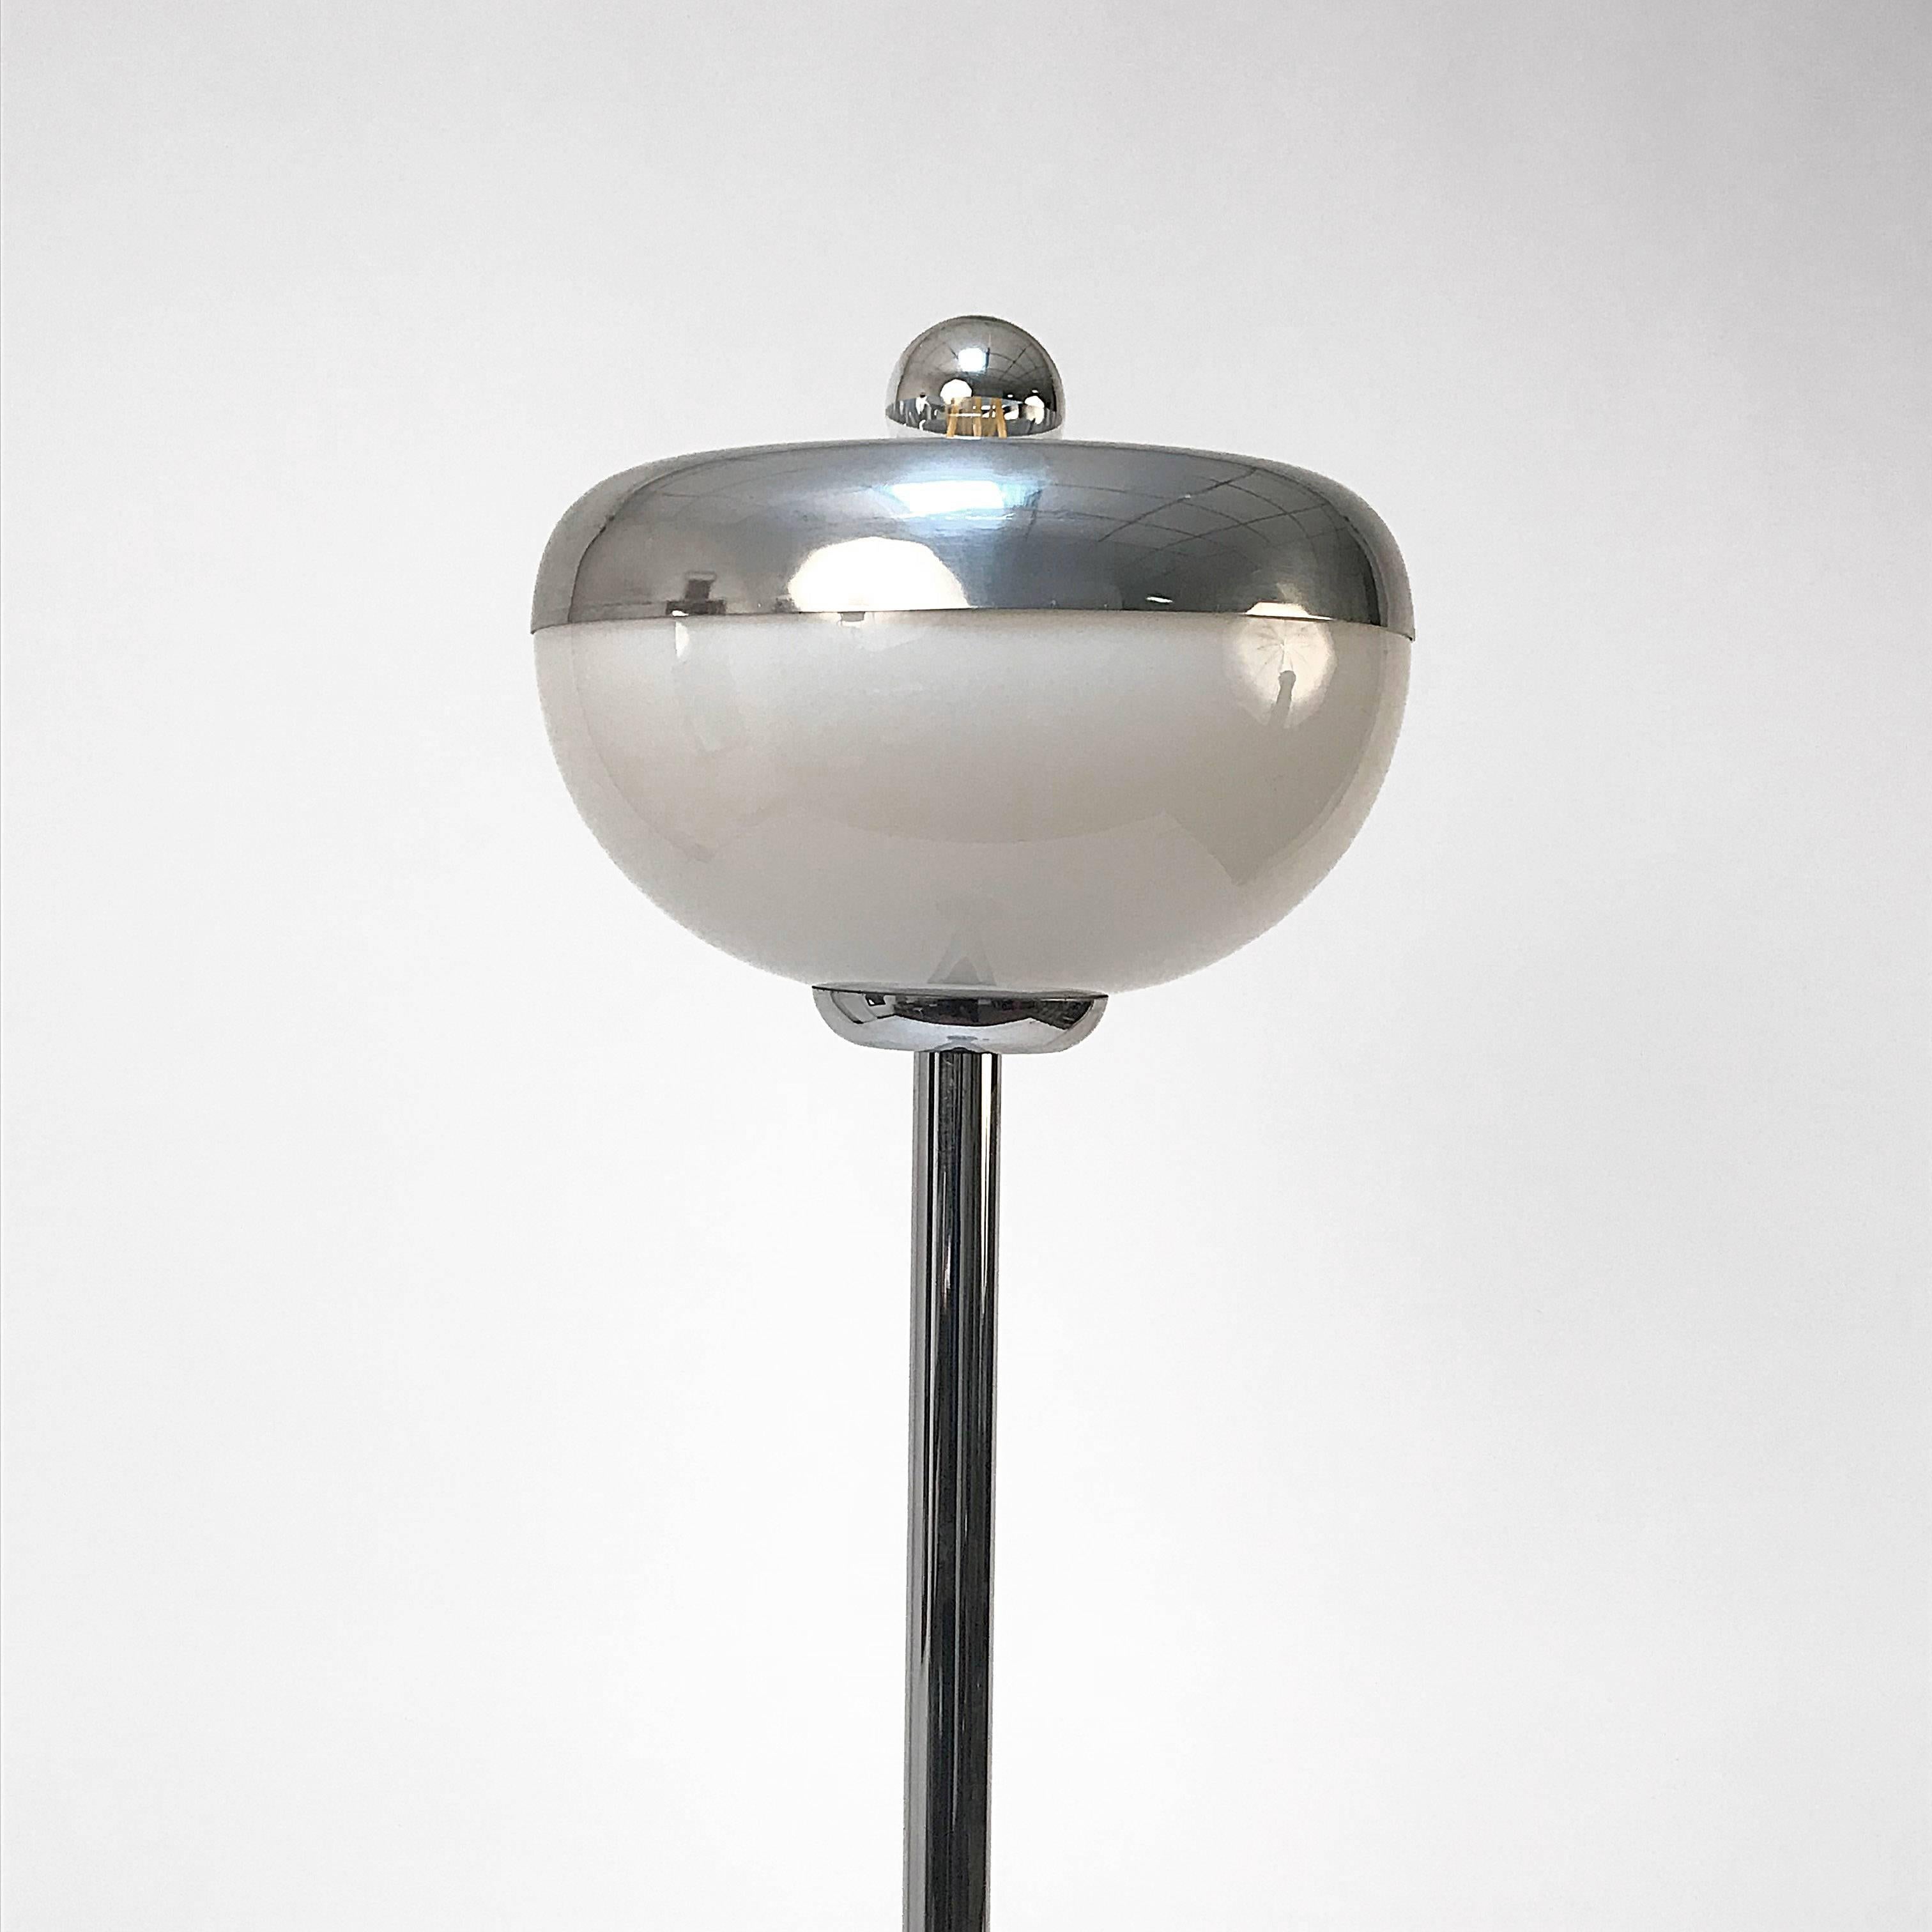 Double-start floor lamp in chromed metal, glass, and aluminium. Carrara marble base produced in Italy, 1960s-1970s.